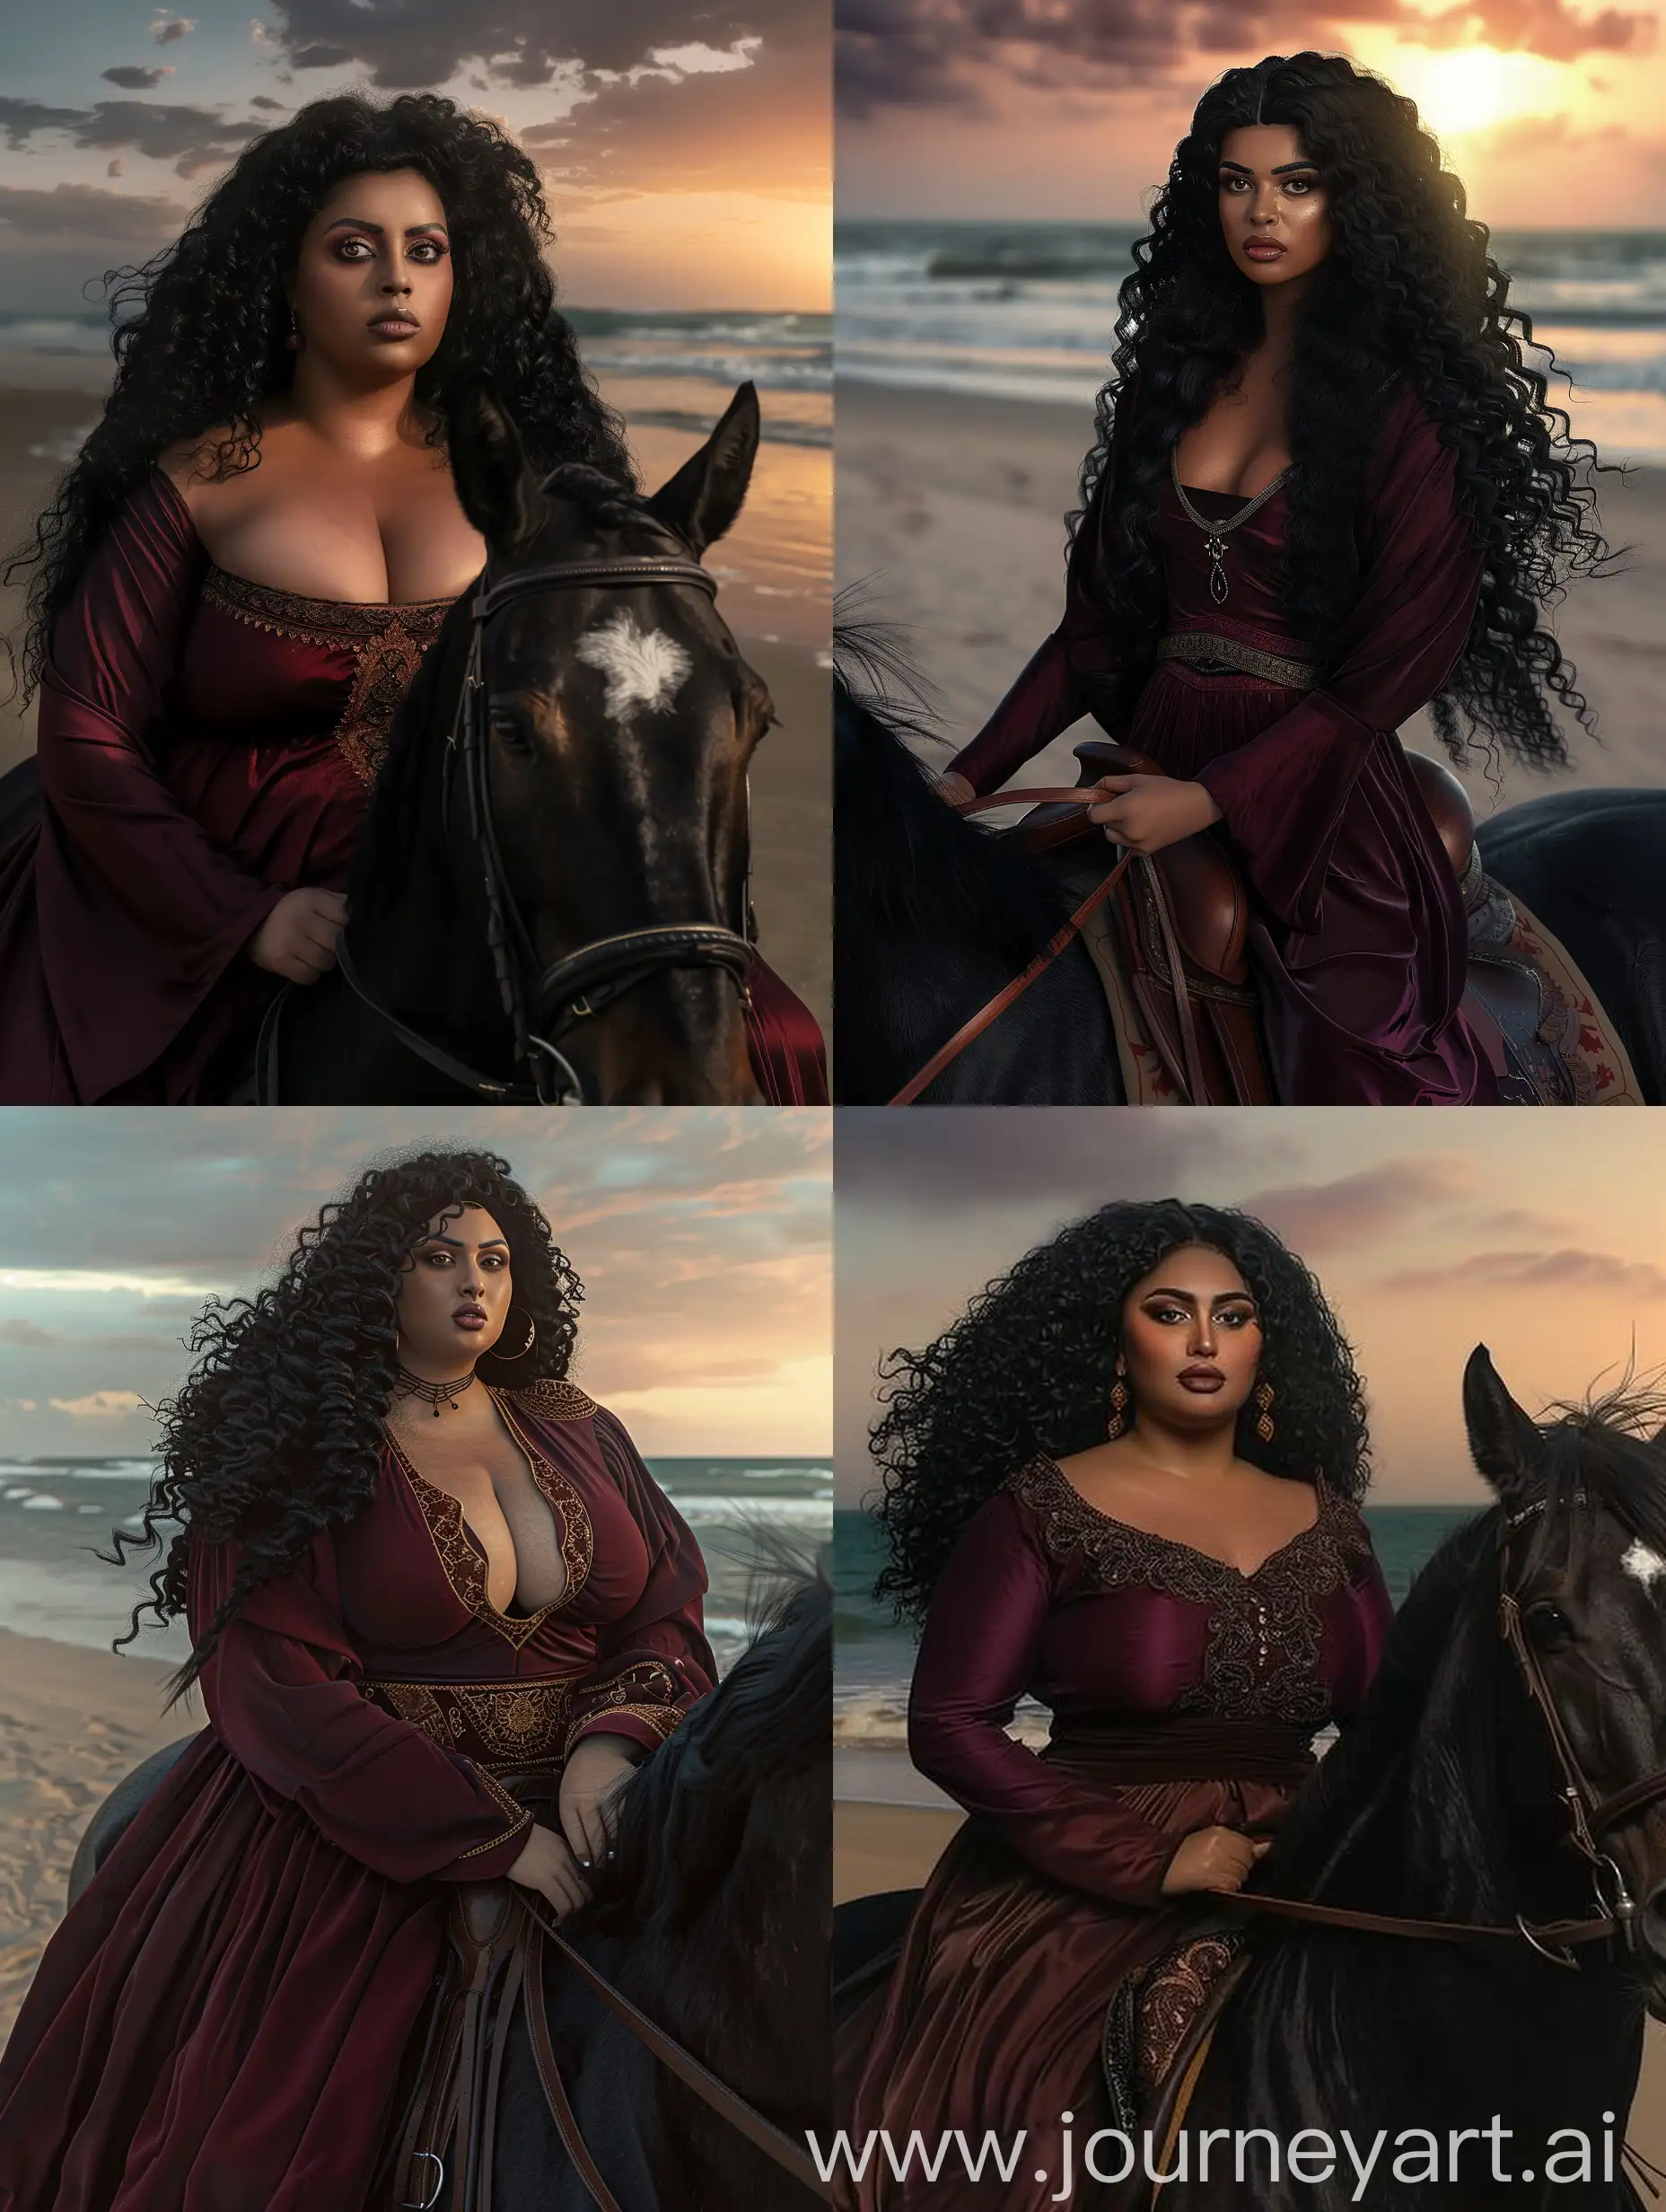 A black-skinned woman, weighing 80 kilograms, with features from the Arabian Gulf region, with large breasts, a large ass, wide brown eyes, full lips, a small nose, and long black curly hair. She wears traditional burgundy-coloured Kuwaiti clothing, riding a purebred black Arabian horse at sunset on the beach.